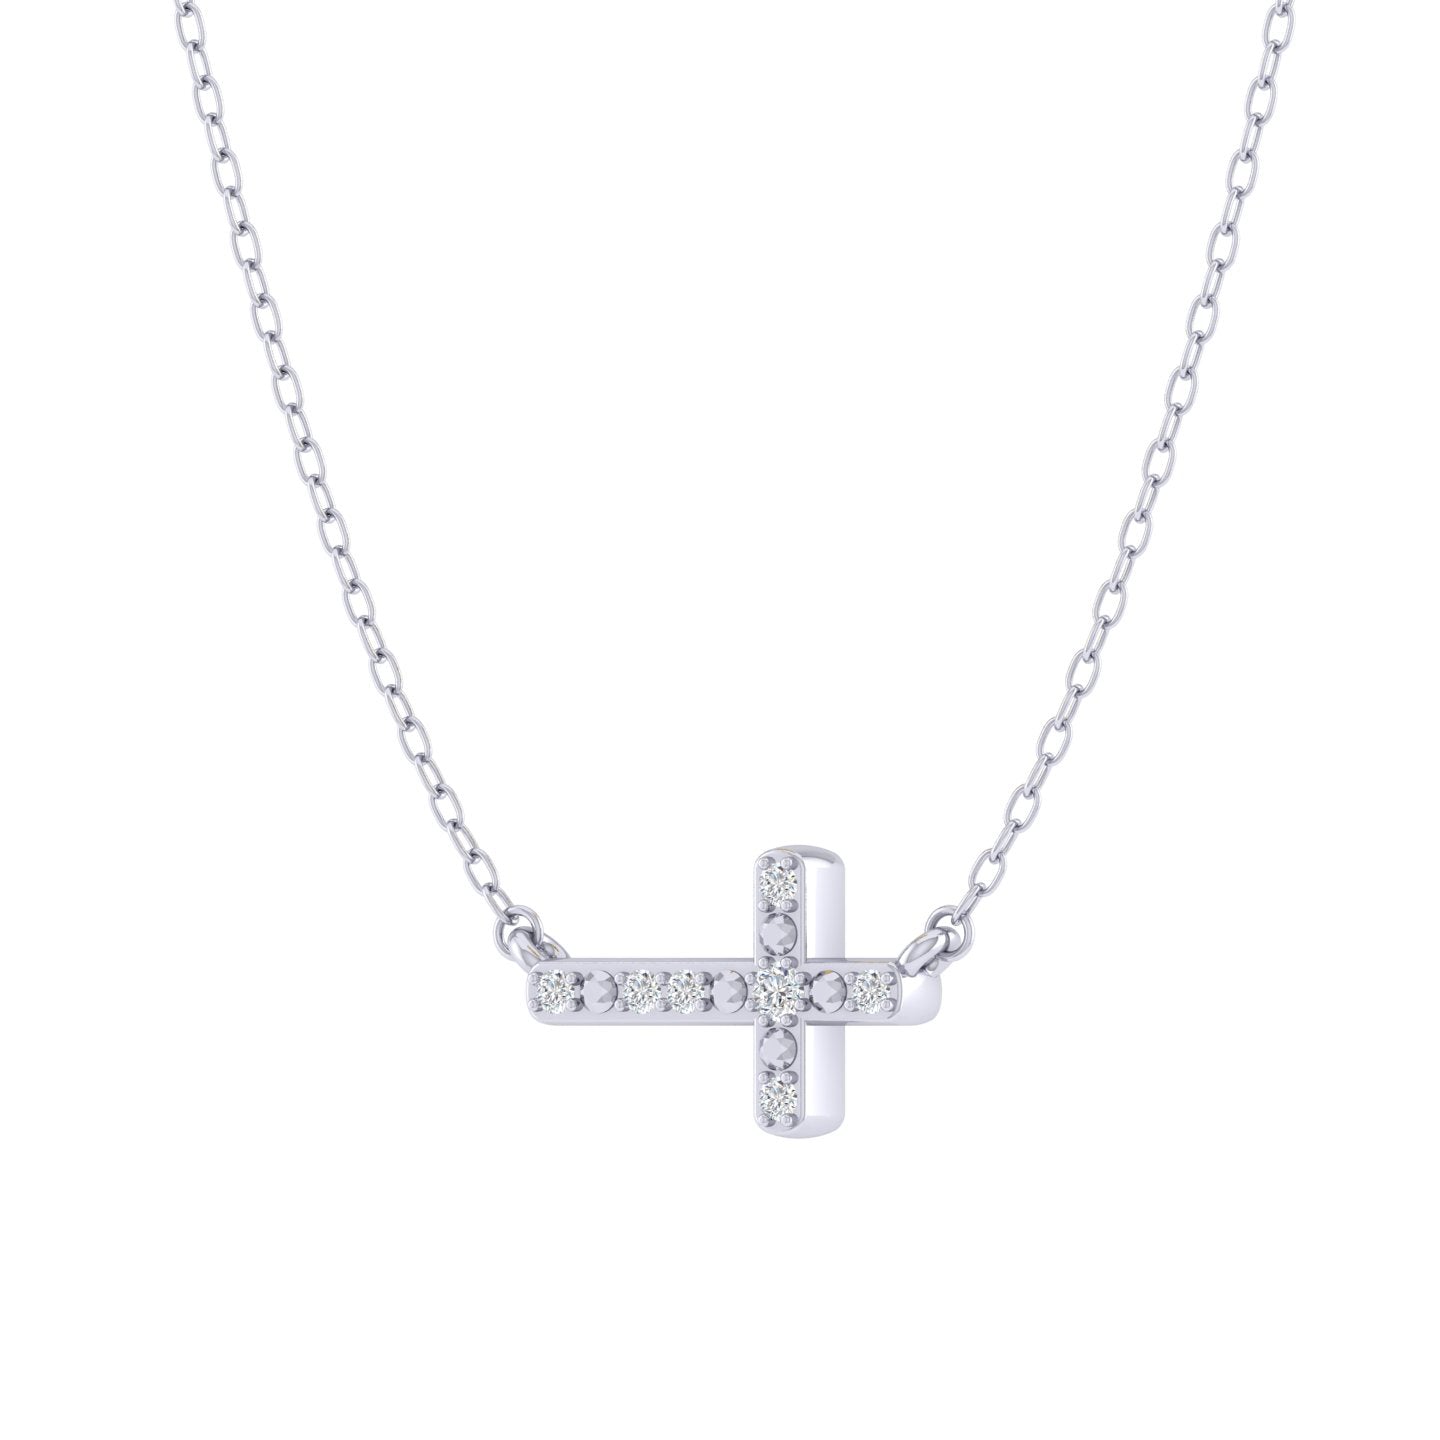 Sideways Cross 1/20 Cttw Natural Diamond Pendant Necklace set in 925 Sterling Silver